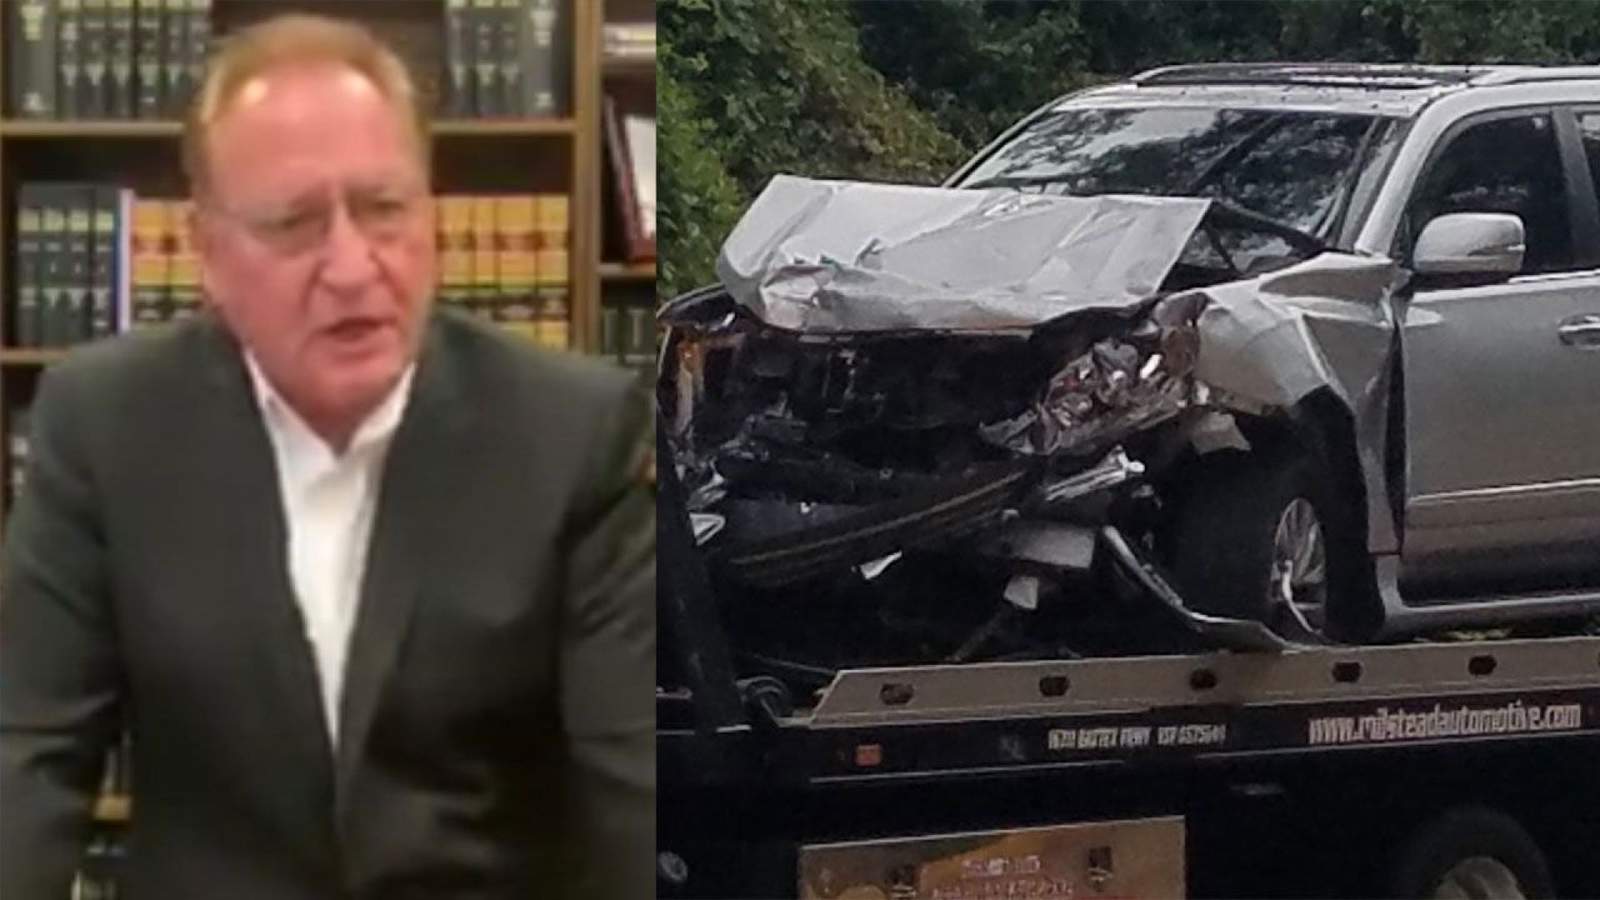 Montgomery County Judge Mark Keough charged with DWI in September crash